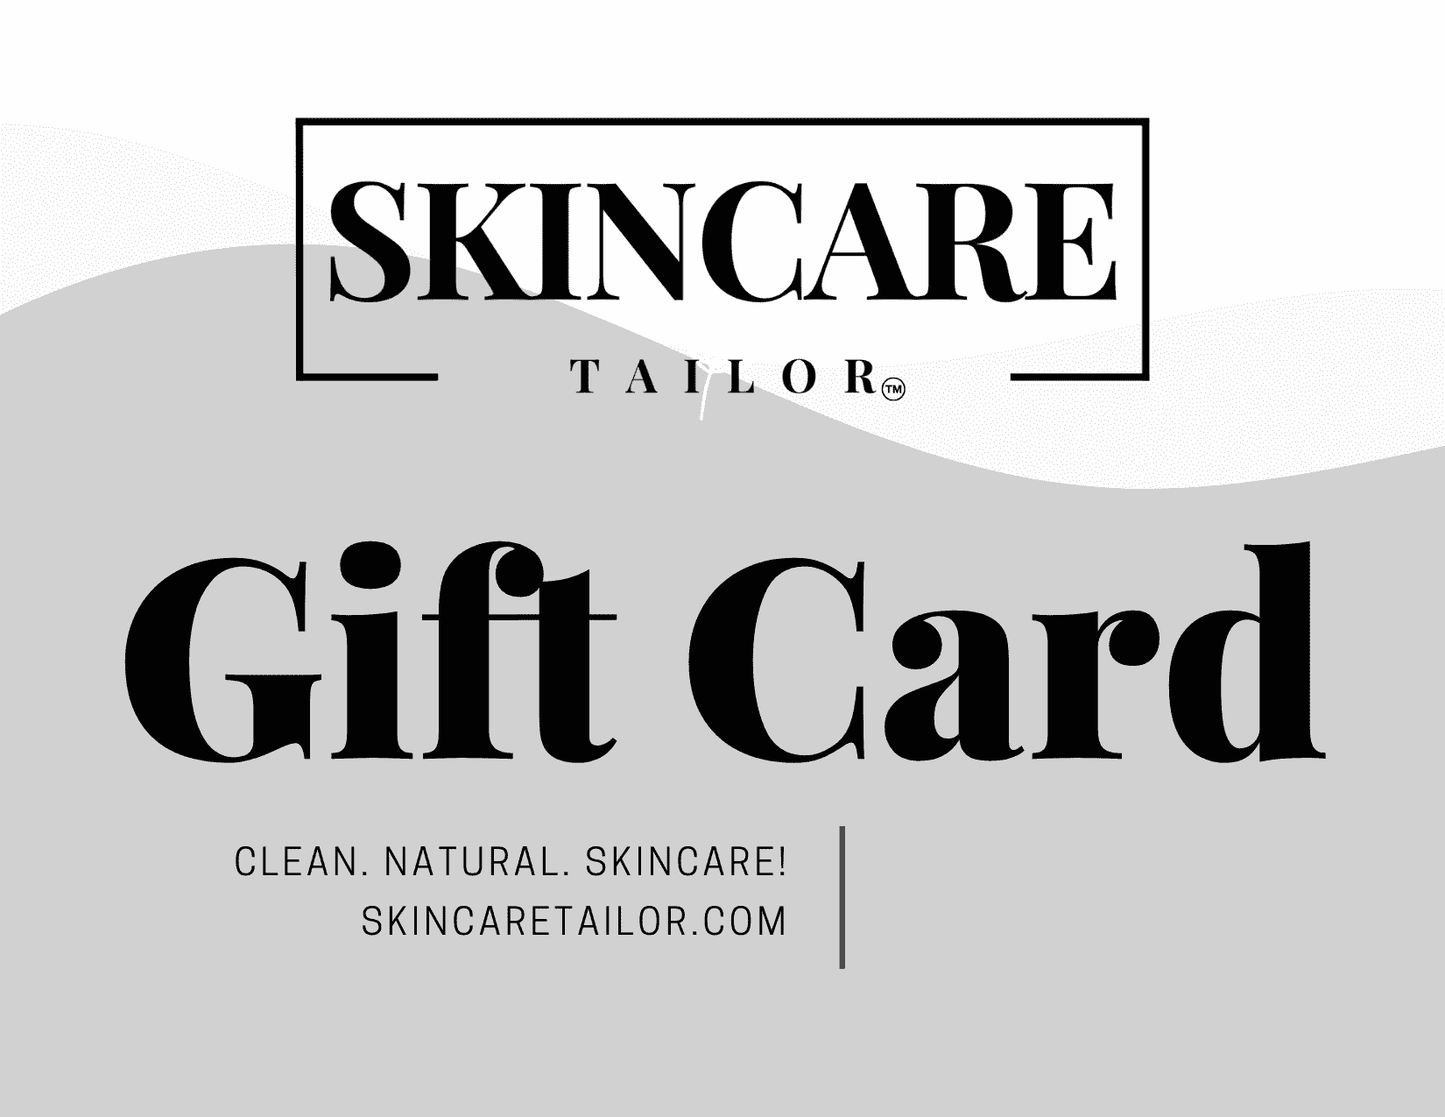 Gift Cards | Skincare Tailor